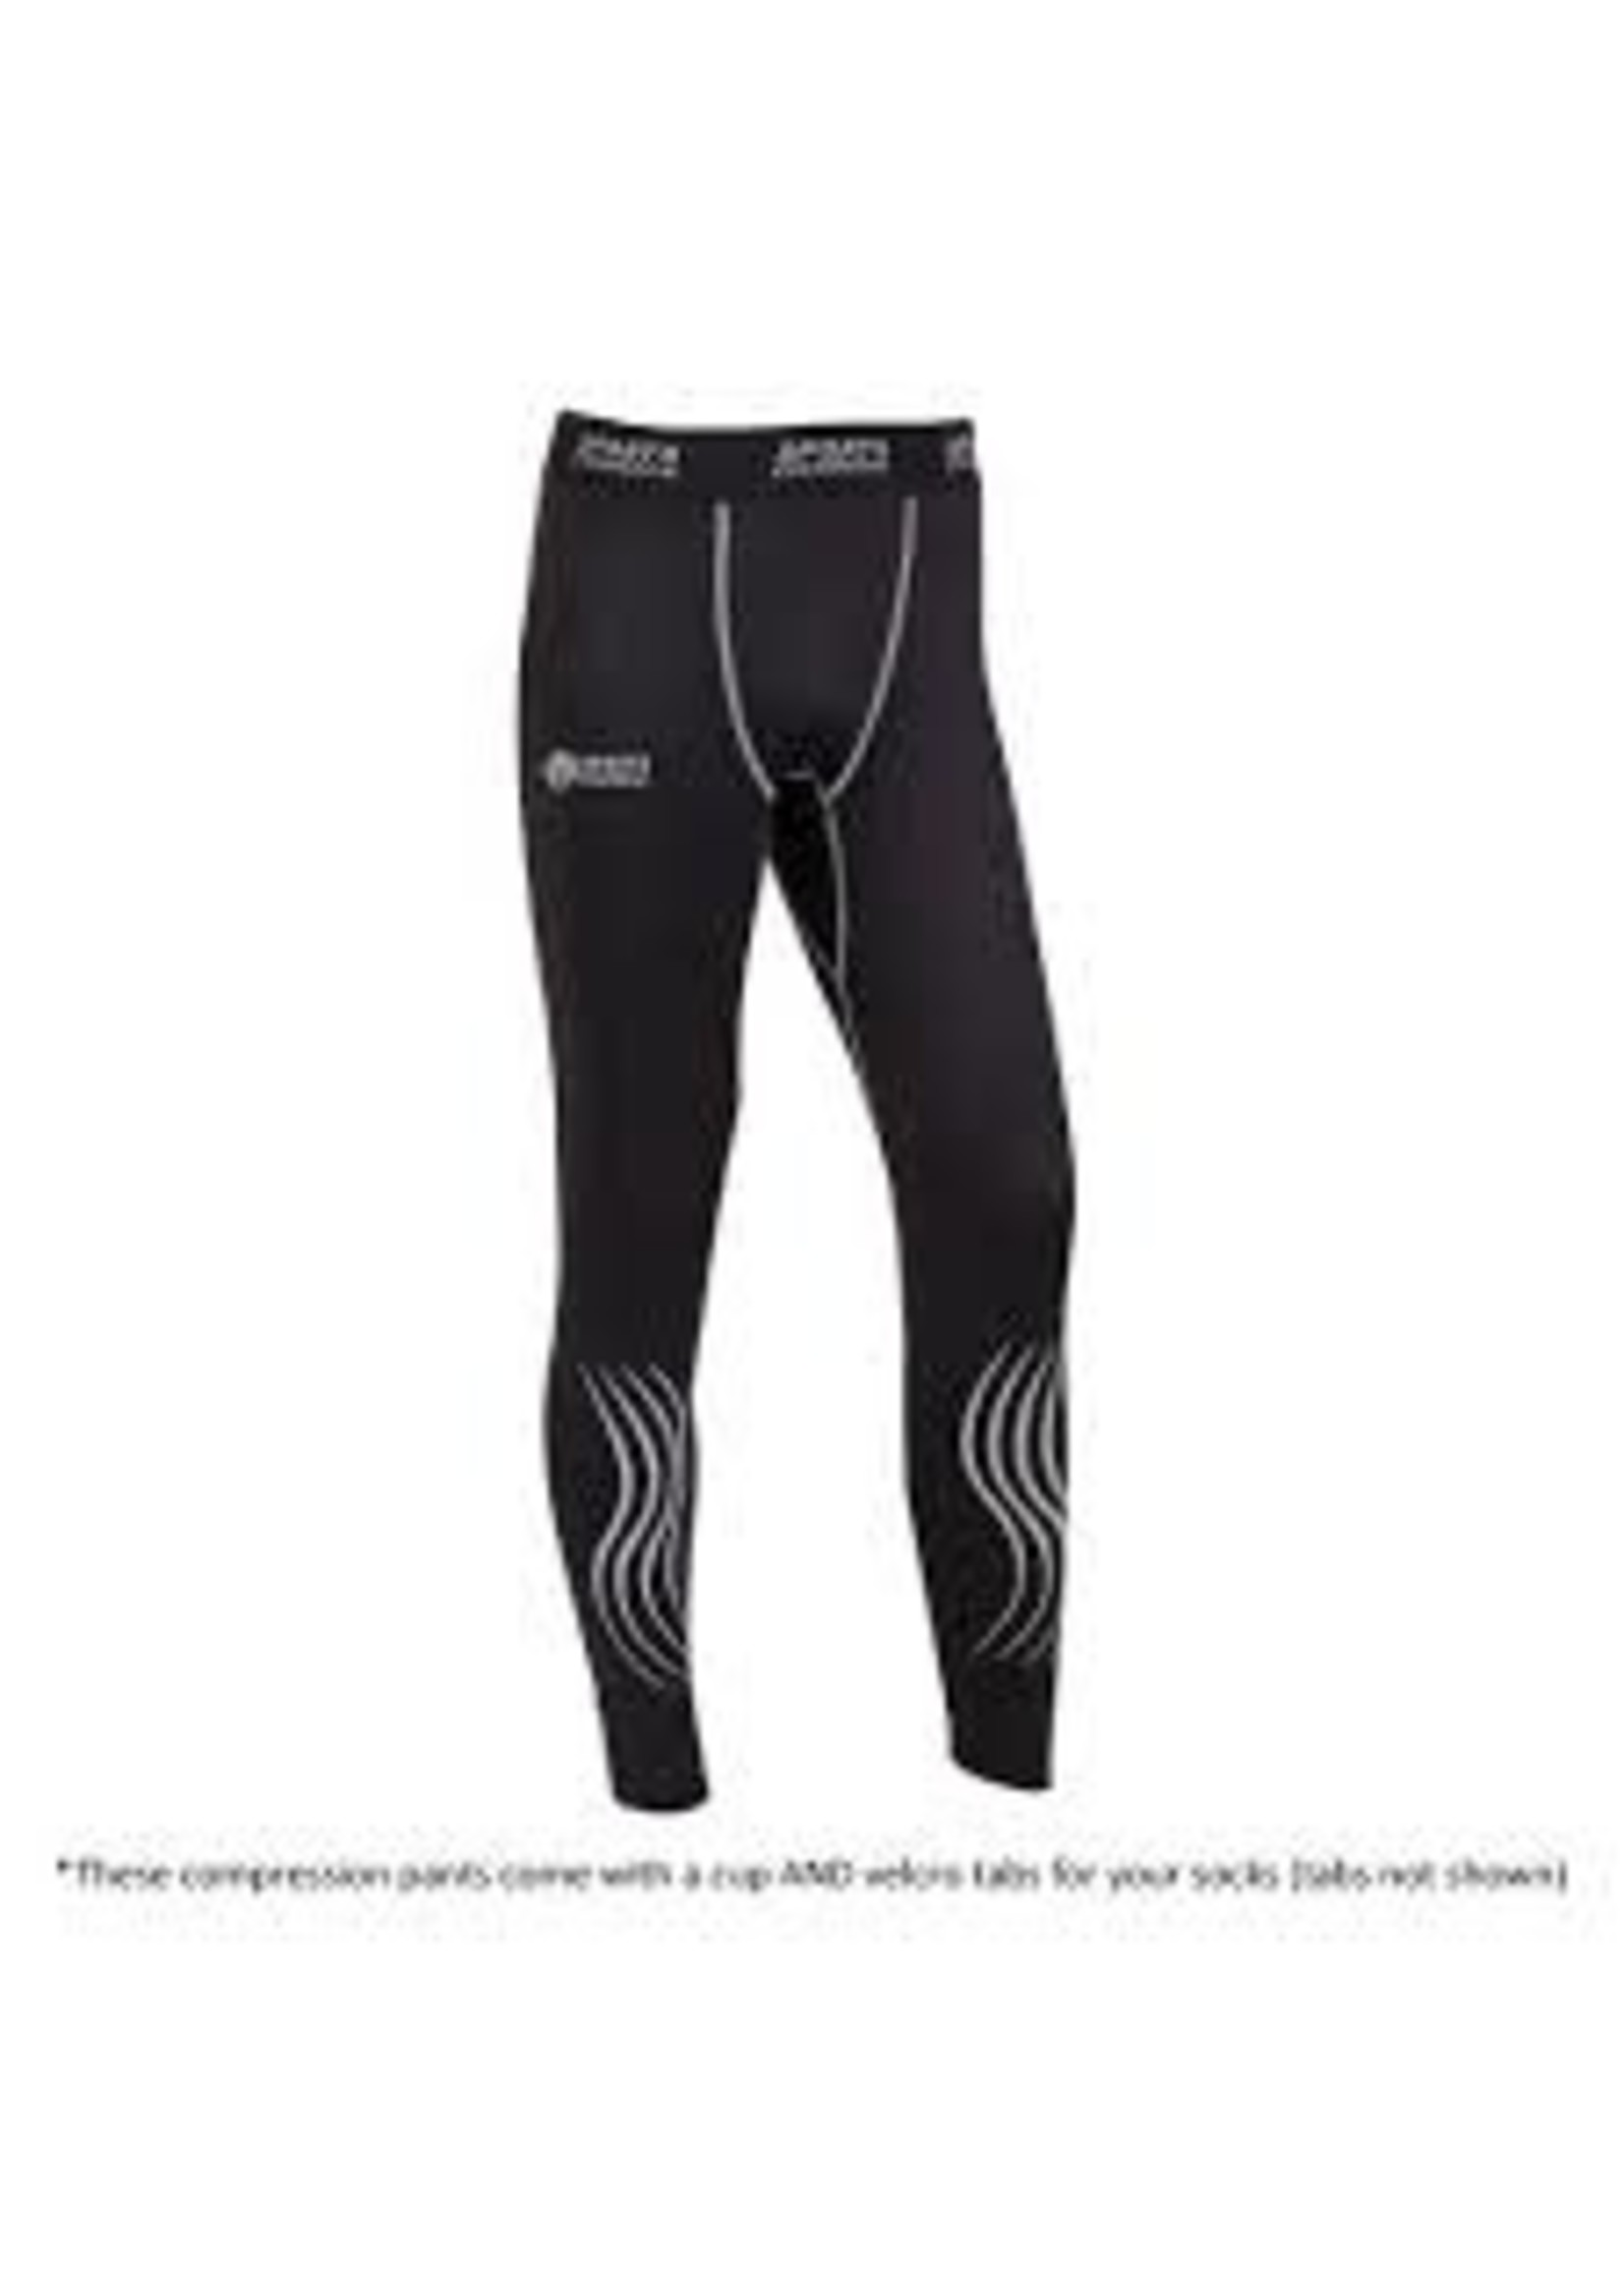 SPORT EXCELLENCE SPORTS EXCELLENCE  COMPRESSION PANTS